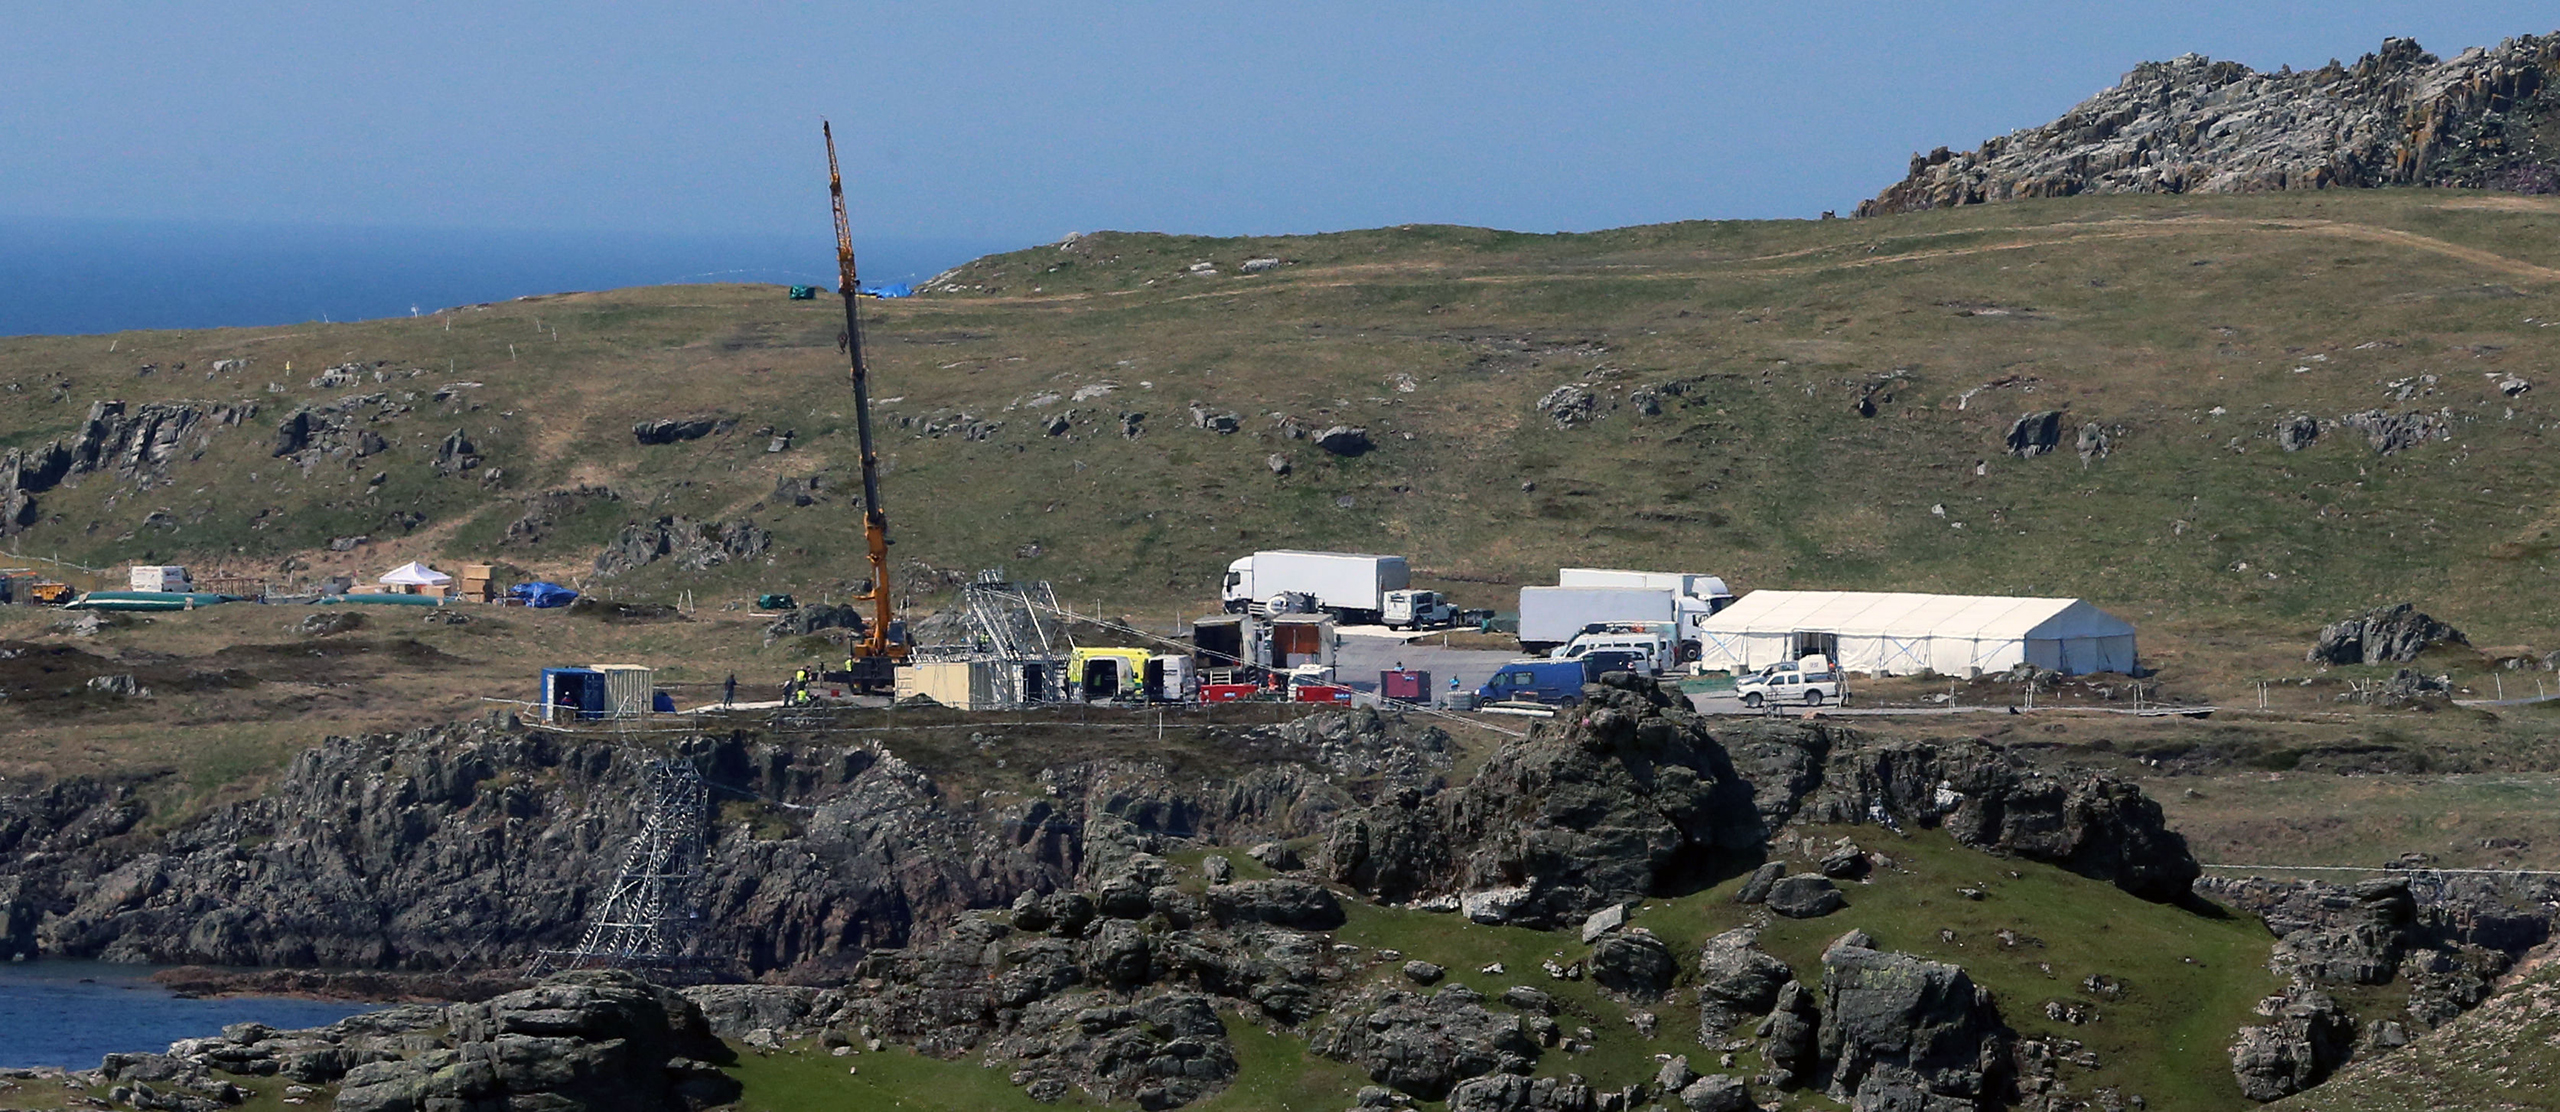 A set is created in Malin Head, Co Donegal Ireland, as filming for the next Star Wars movie will take place there, May 12, 2016. (Niall Carson—PA Wire/Press Association Images/AP)